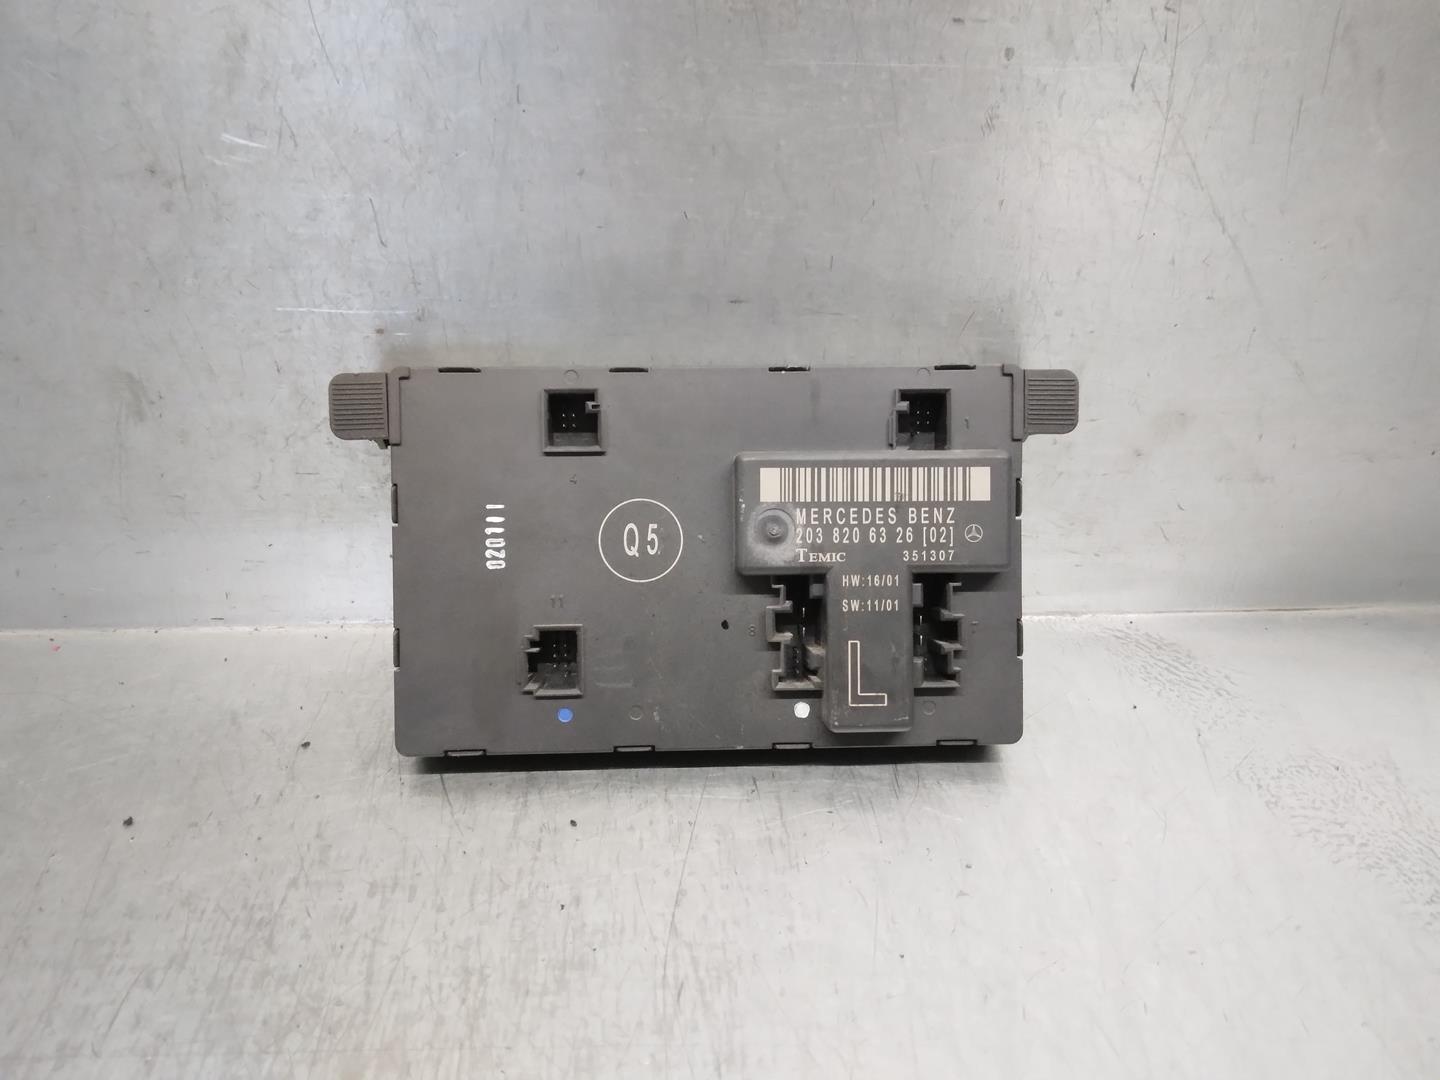 MERCEDES-BENZ C-Class W203/S203/CL203 (2000-2008) Other Control Units 2038206326, 351307, TEMIC 24172491